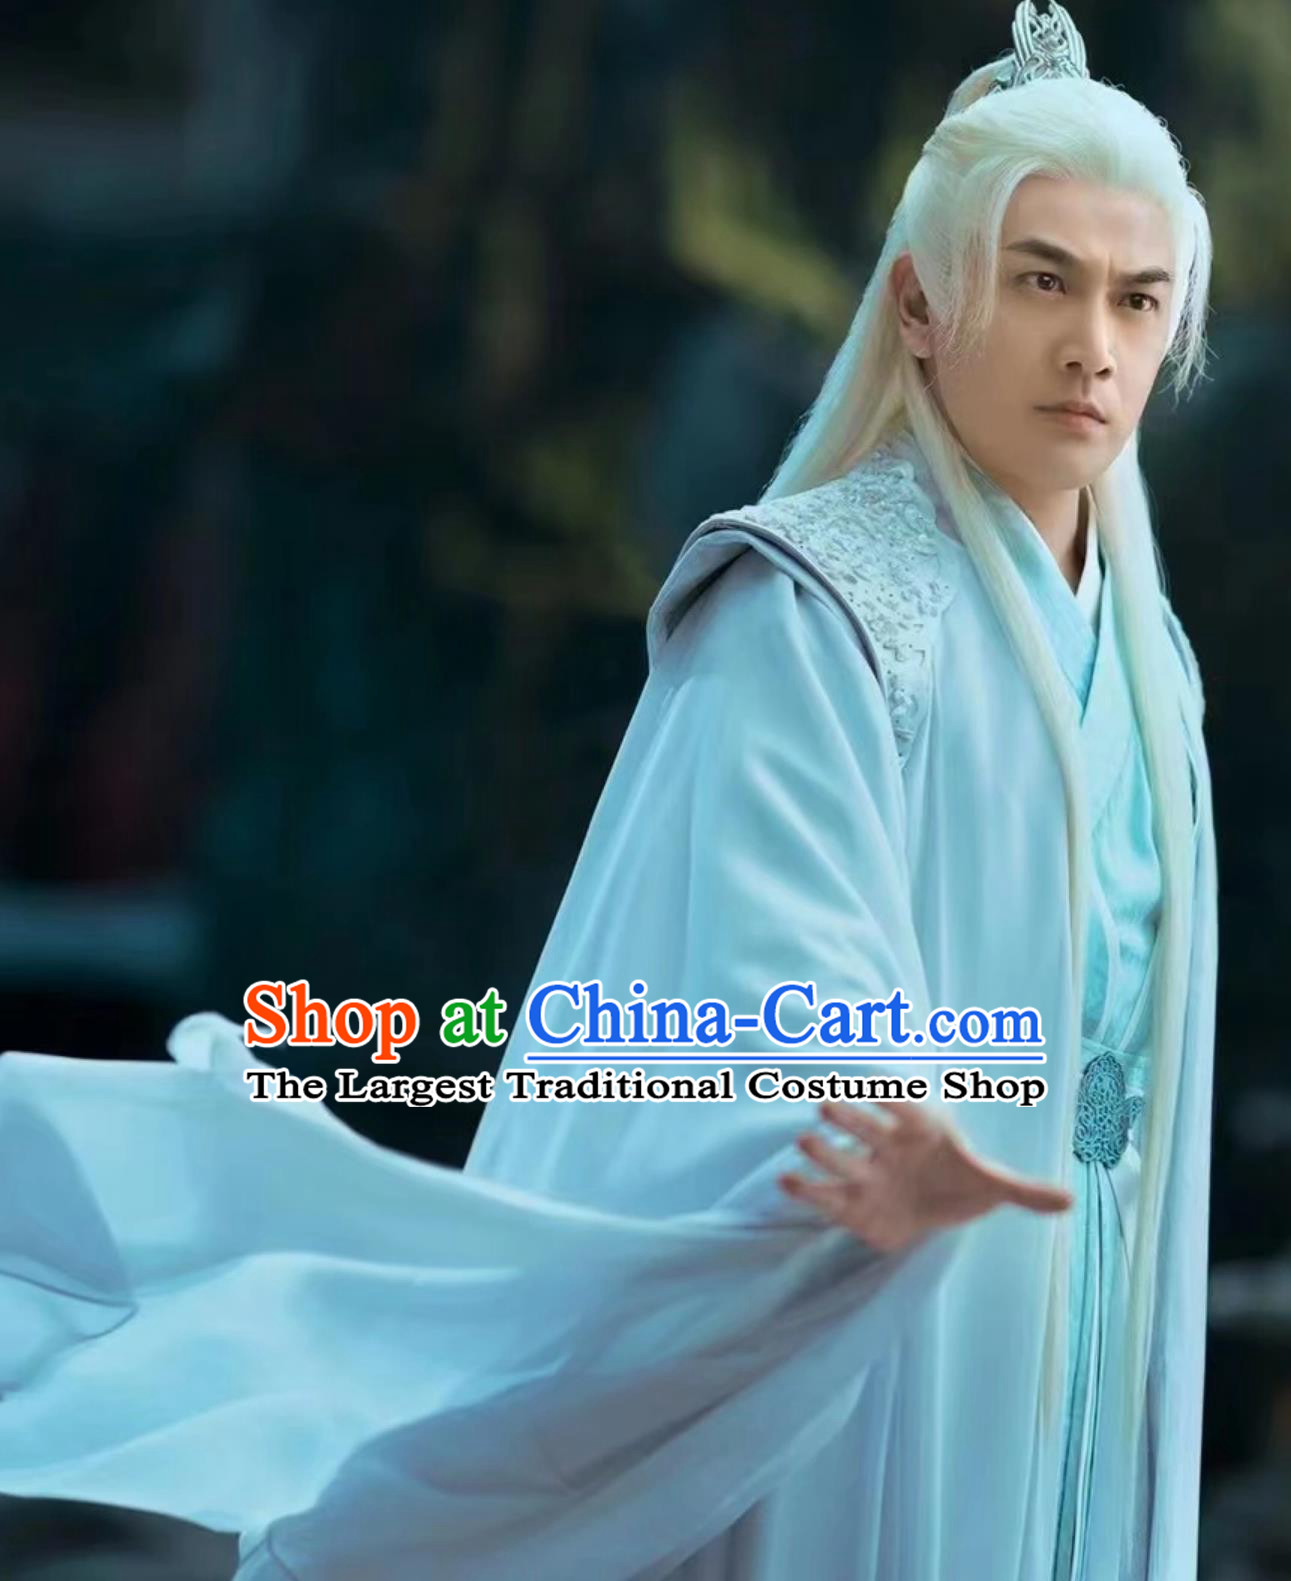 2023 TV Series Back From The Brink Martial Arts Master Ling Xiao Garment Ancient Chinese Super Hero Clothing China Traditional Wuxia Costume